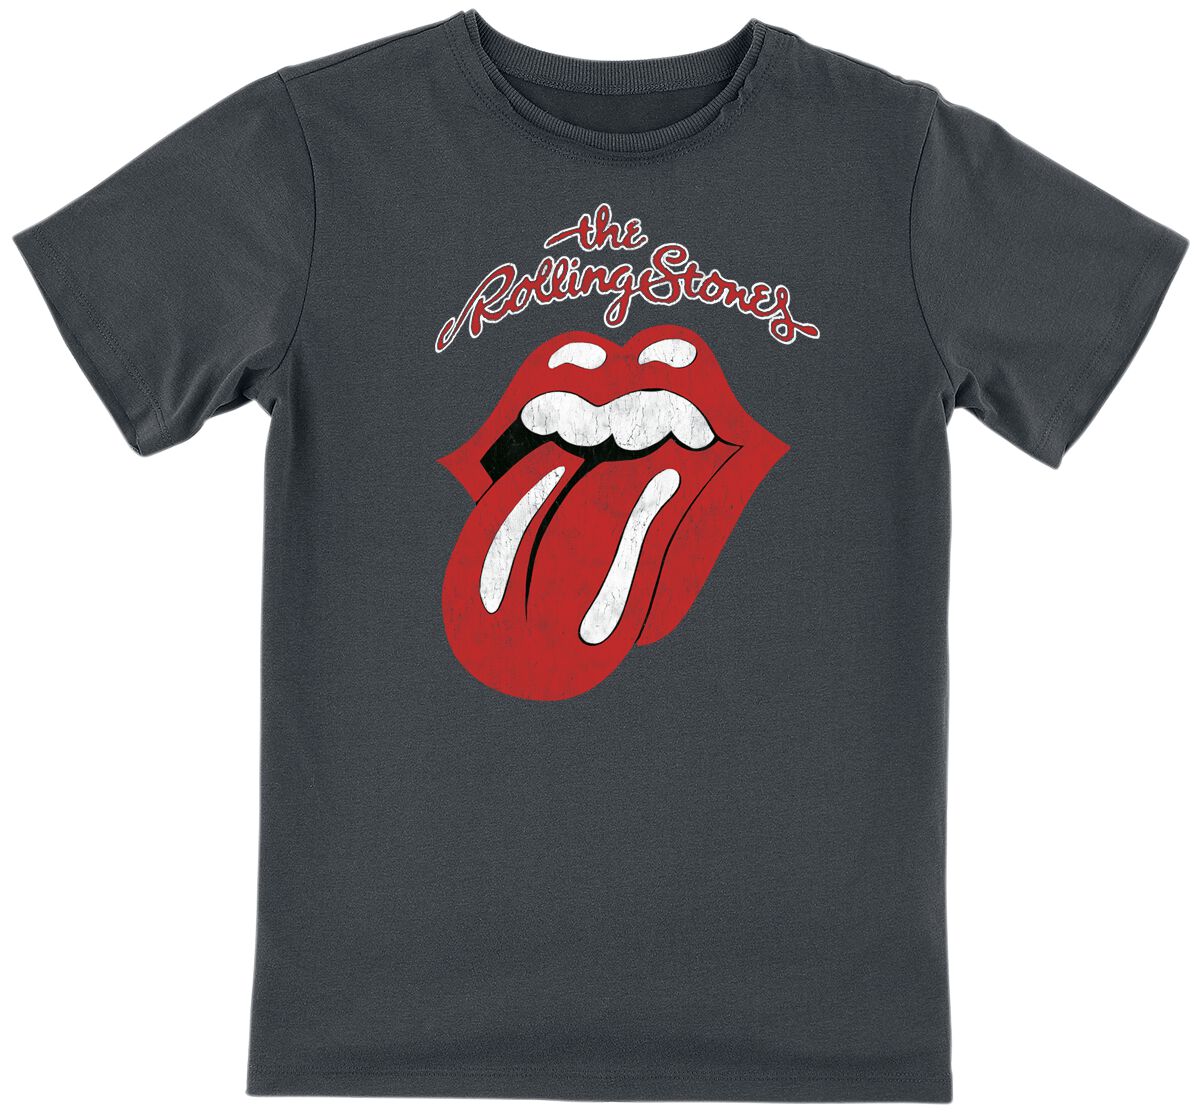 The Rolling Stones Amplified Collection - Square Tongue T-Shirt charcoal in 104